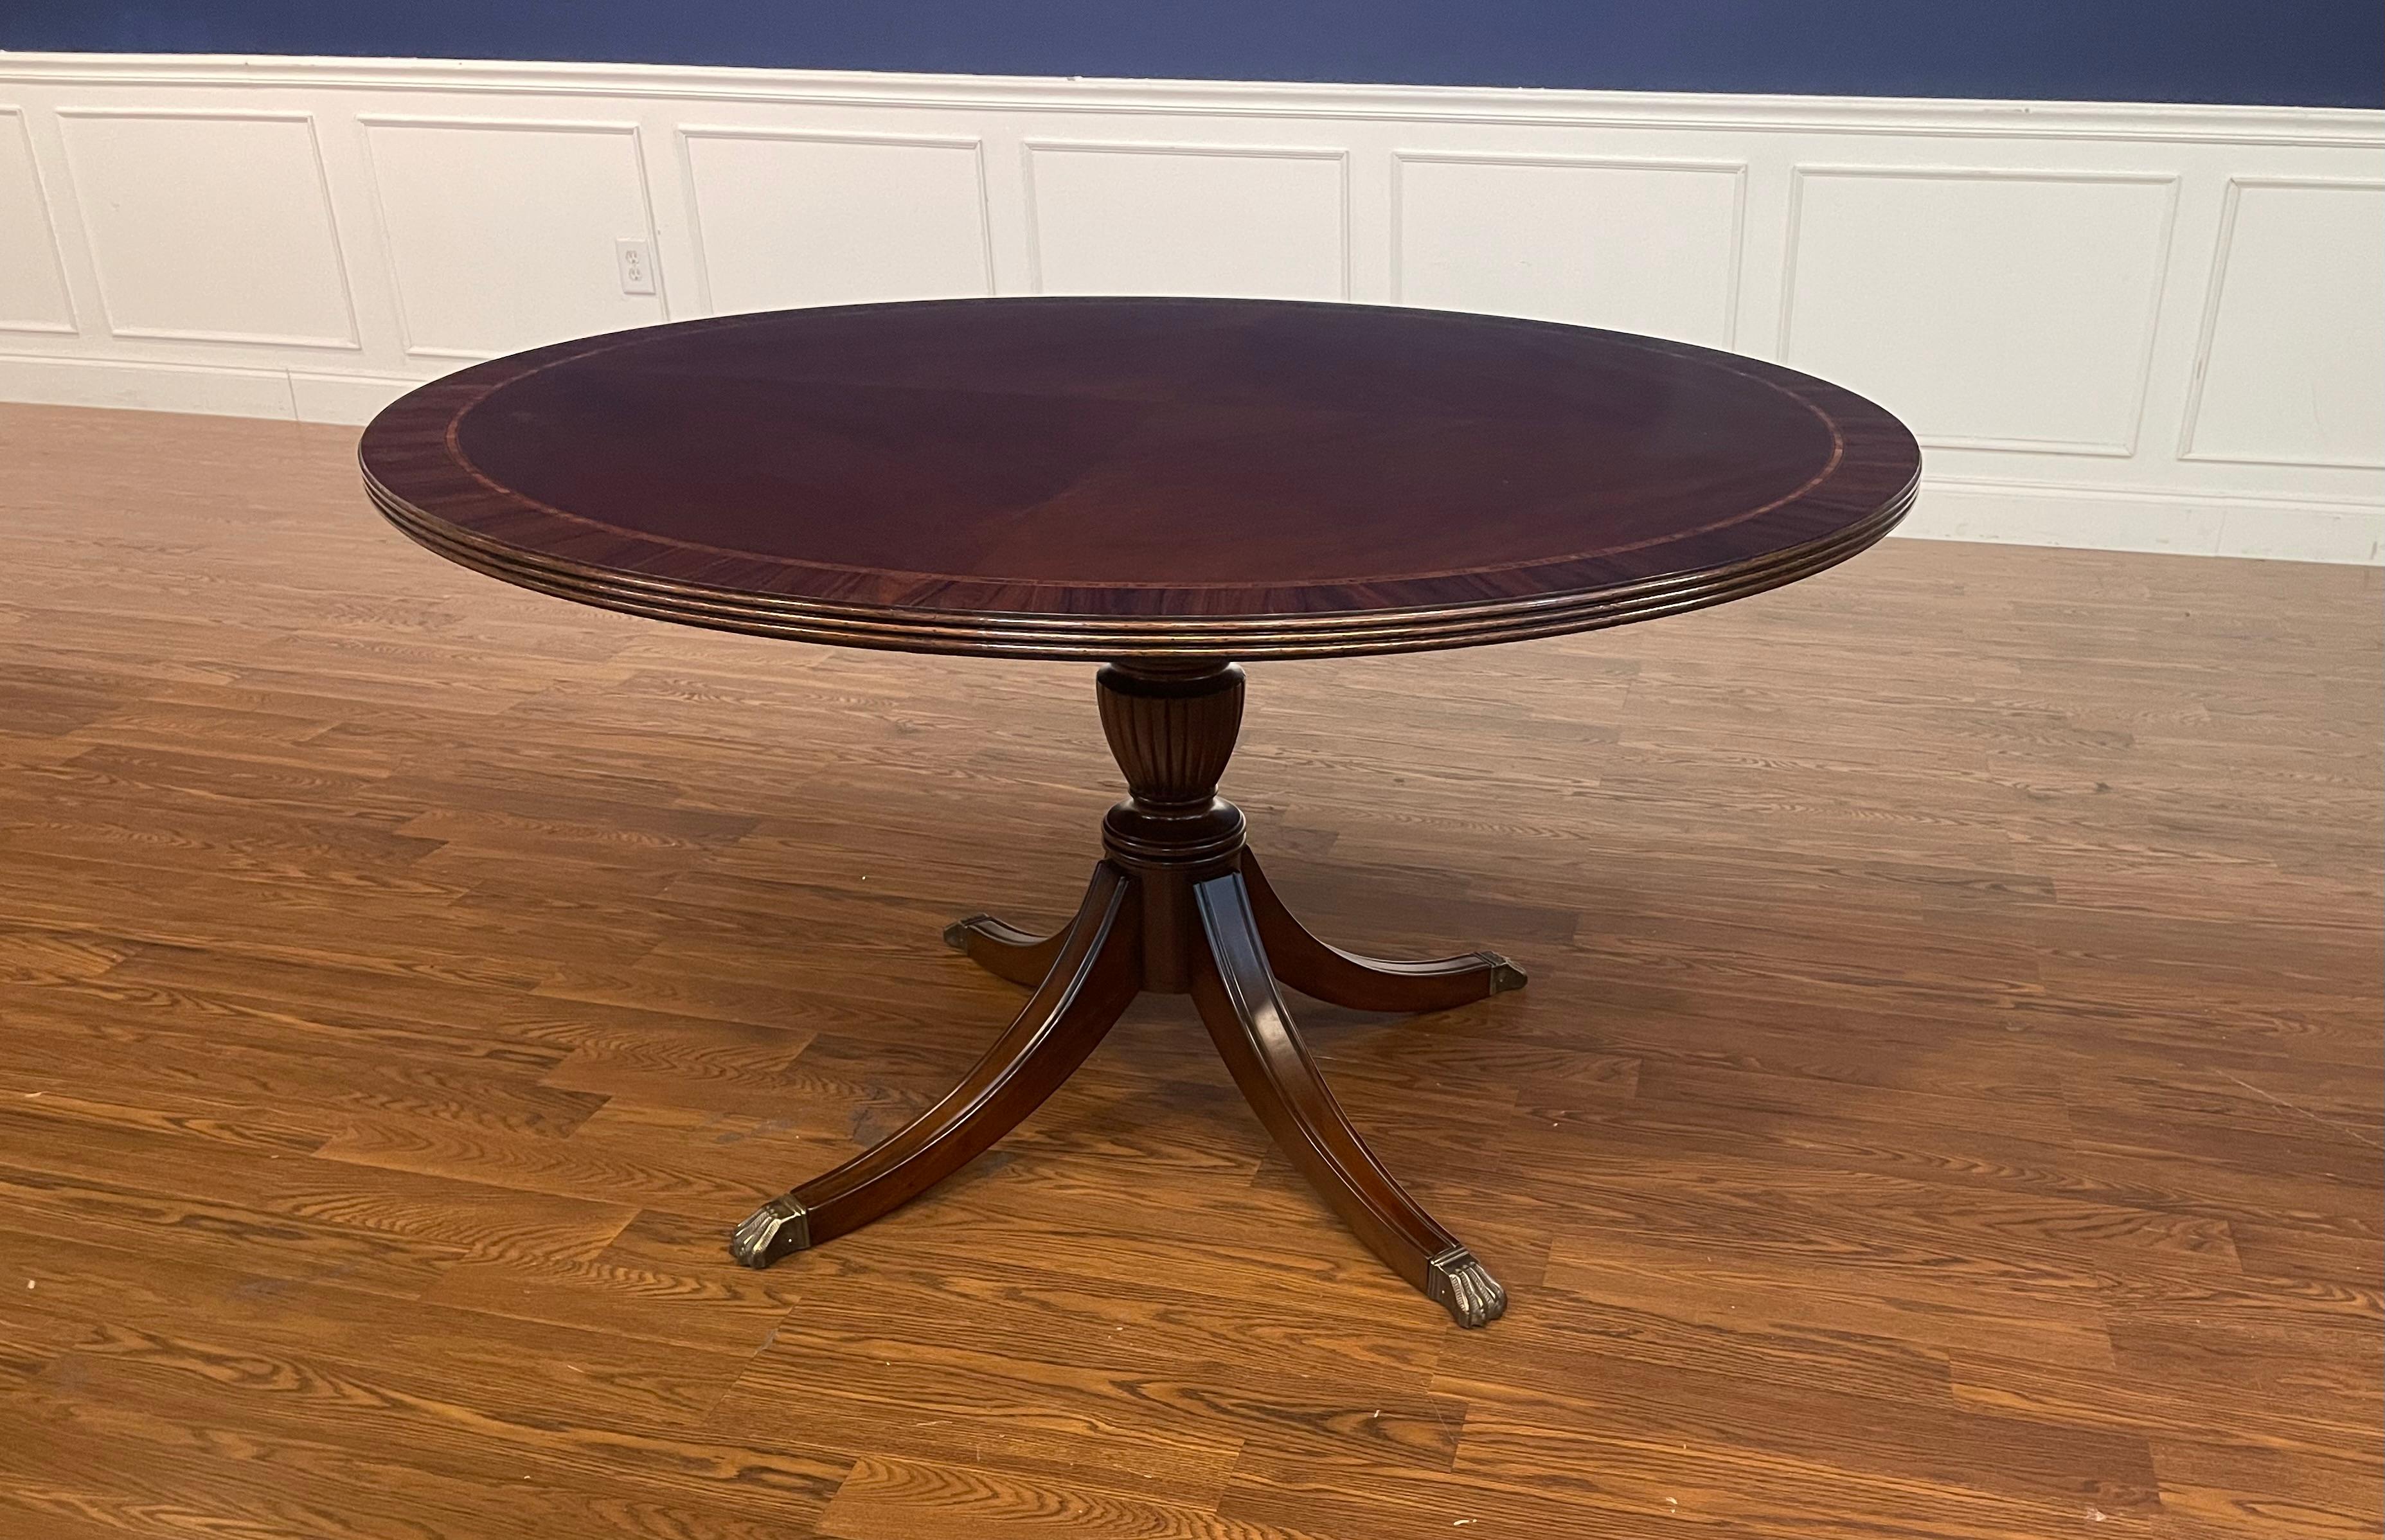 54 inch round dining table seats how many